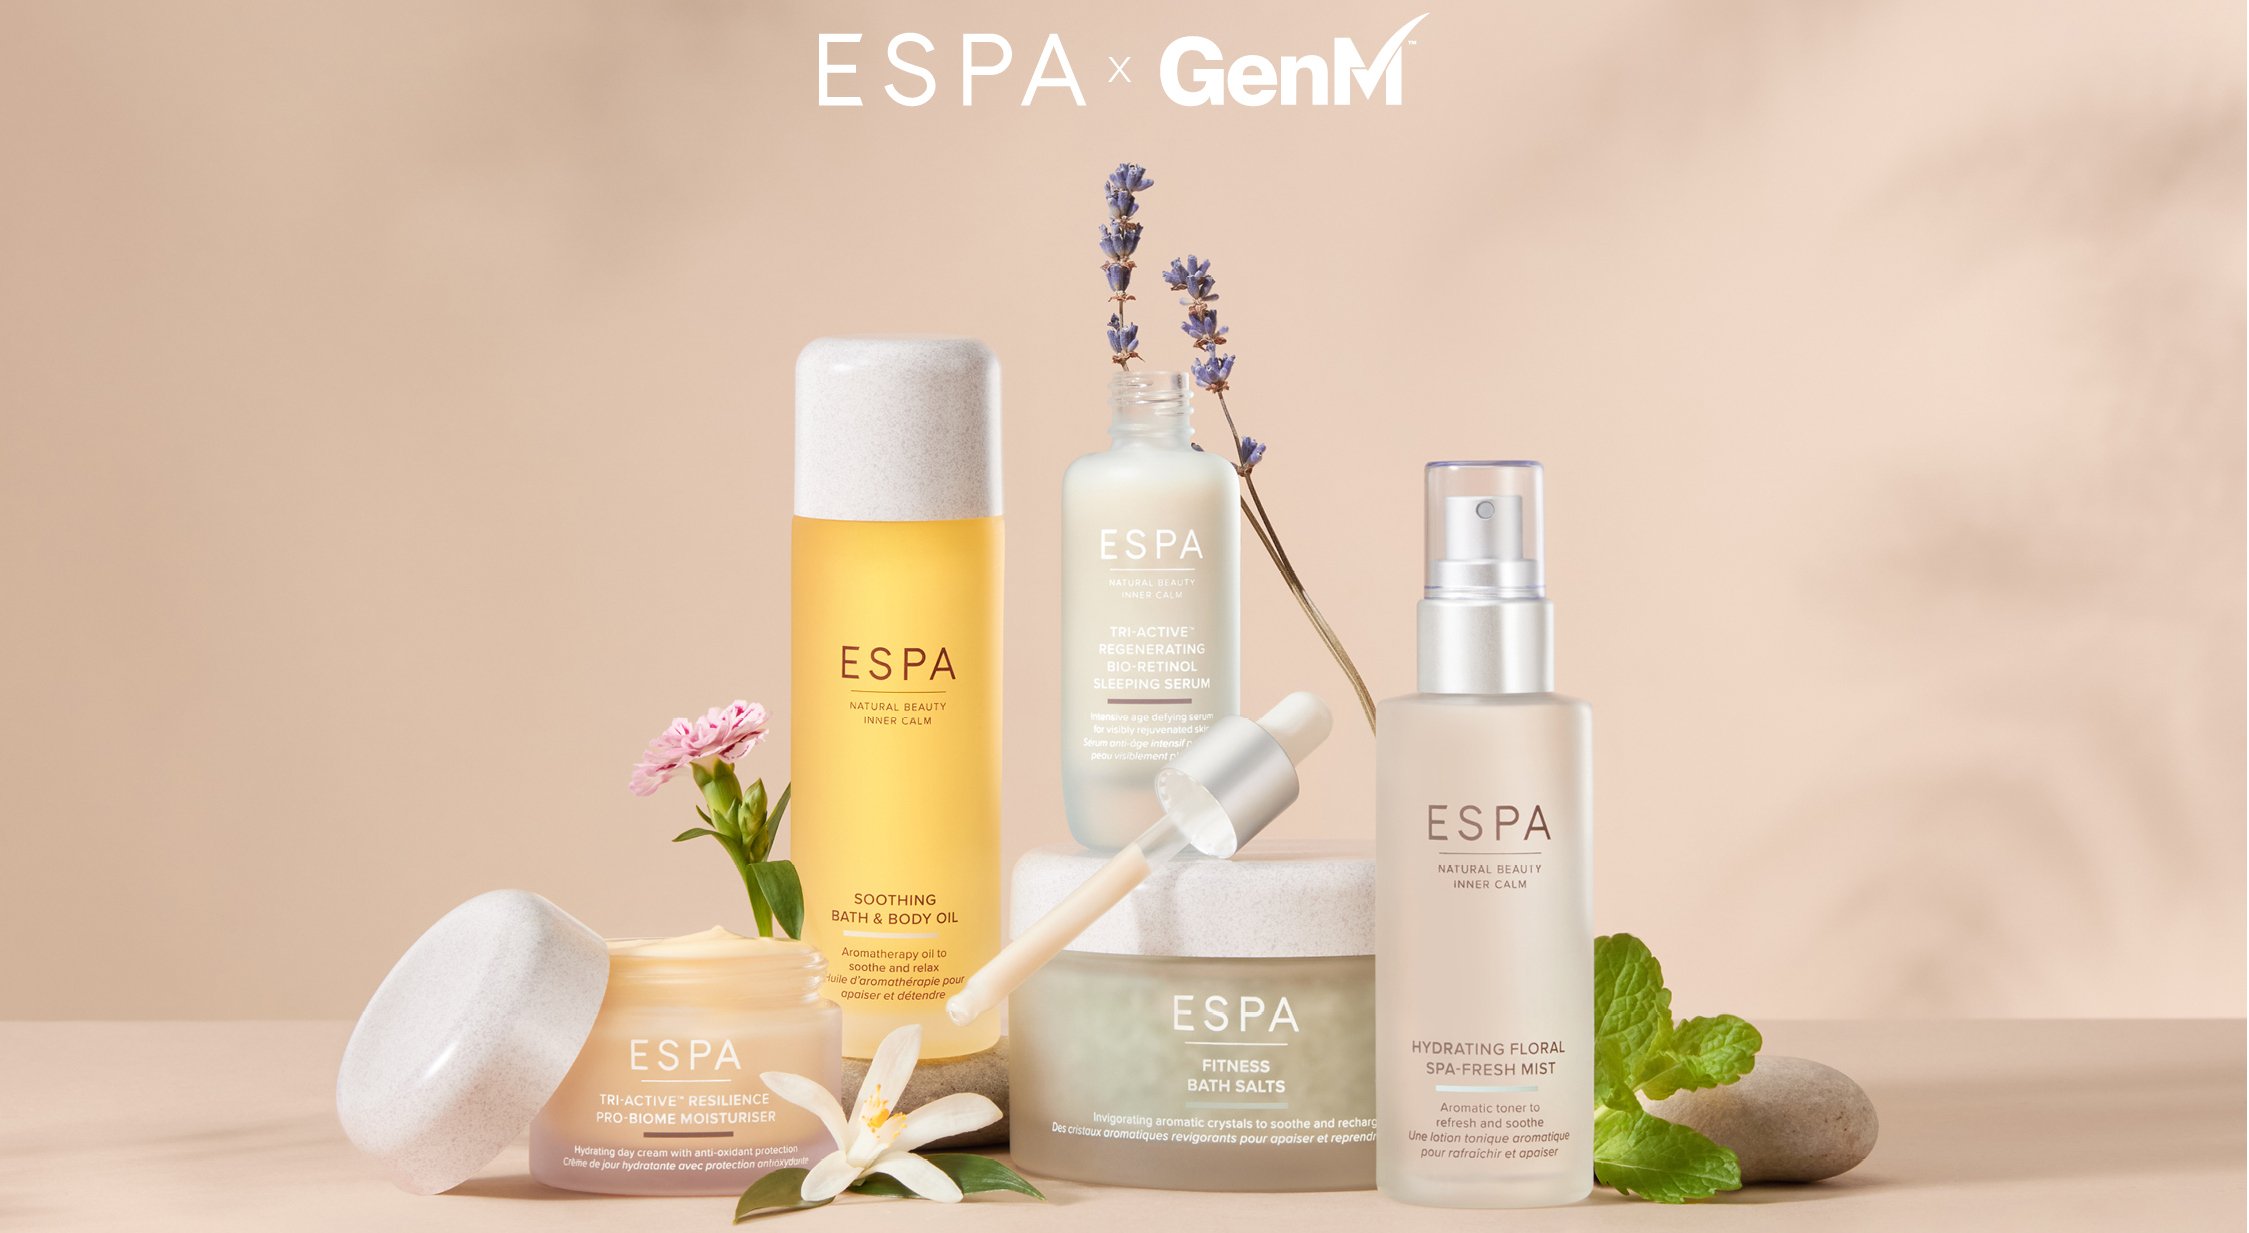 Celebrate Your Skin With ESPA Menopause Friendly Products